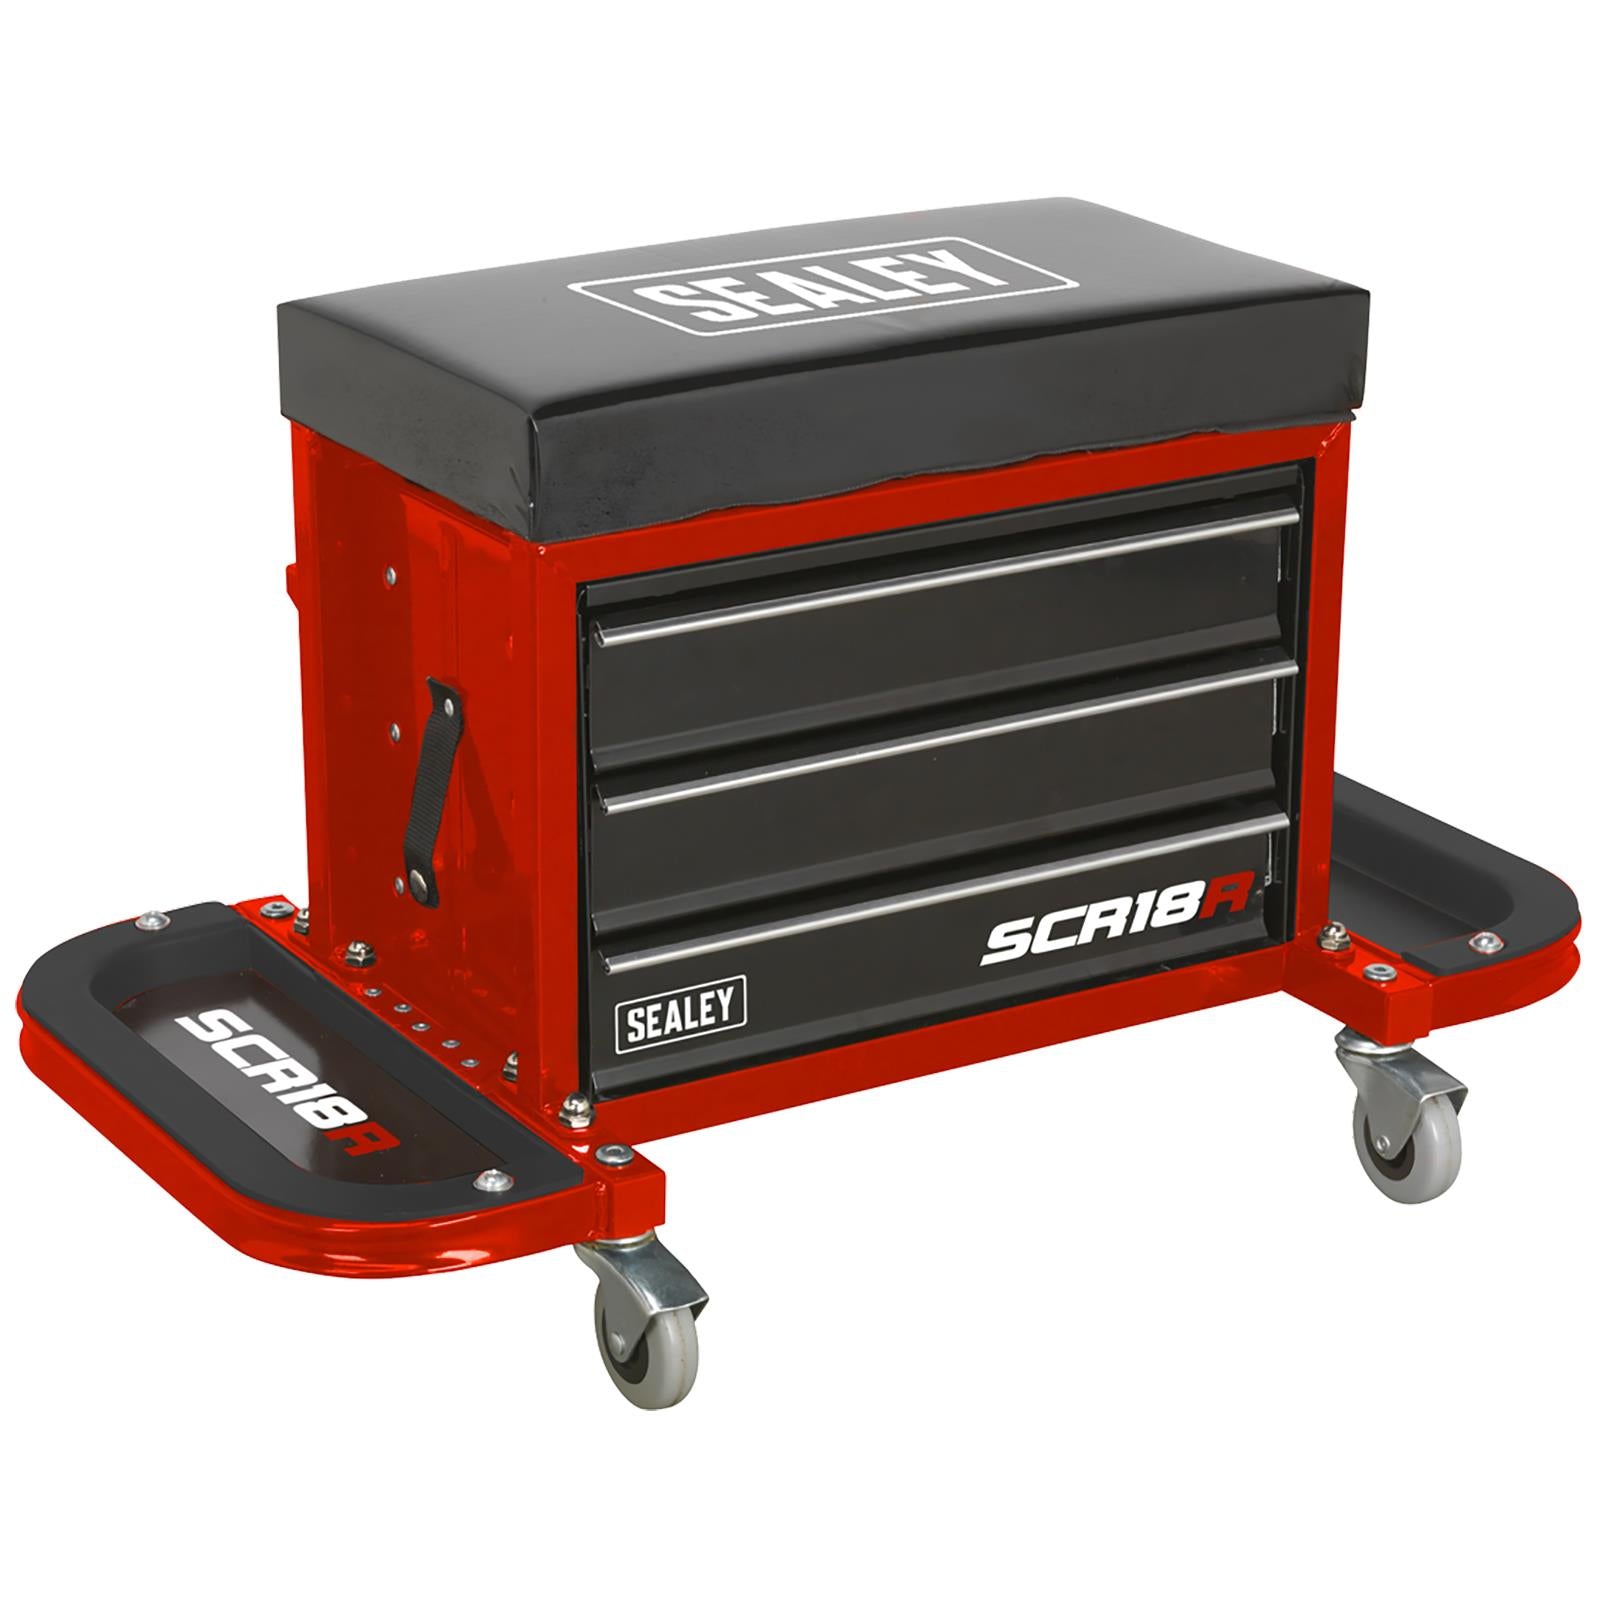 Sealey Mechanics Rolling Utility Seat and Toolbox with Drawers Red